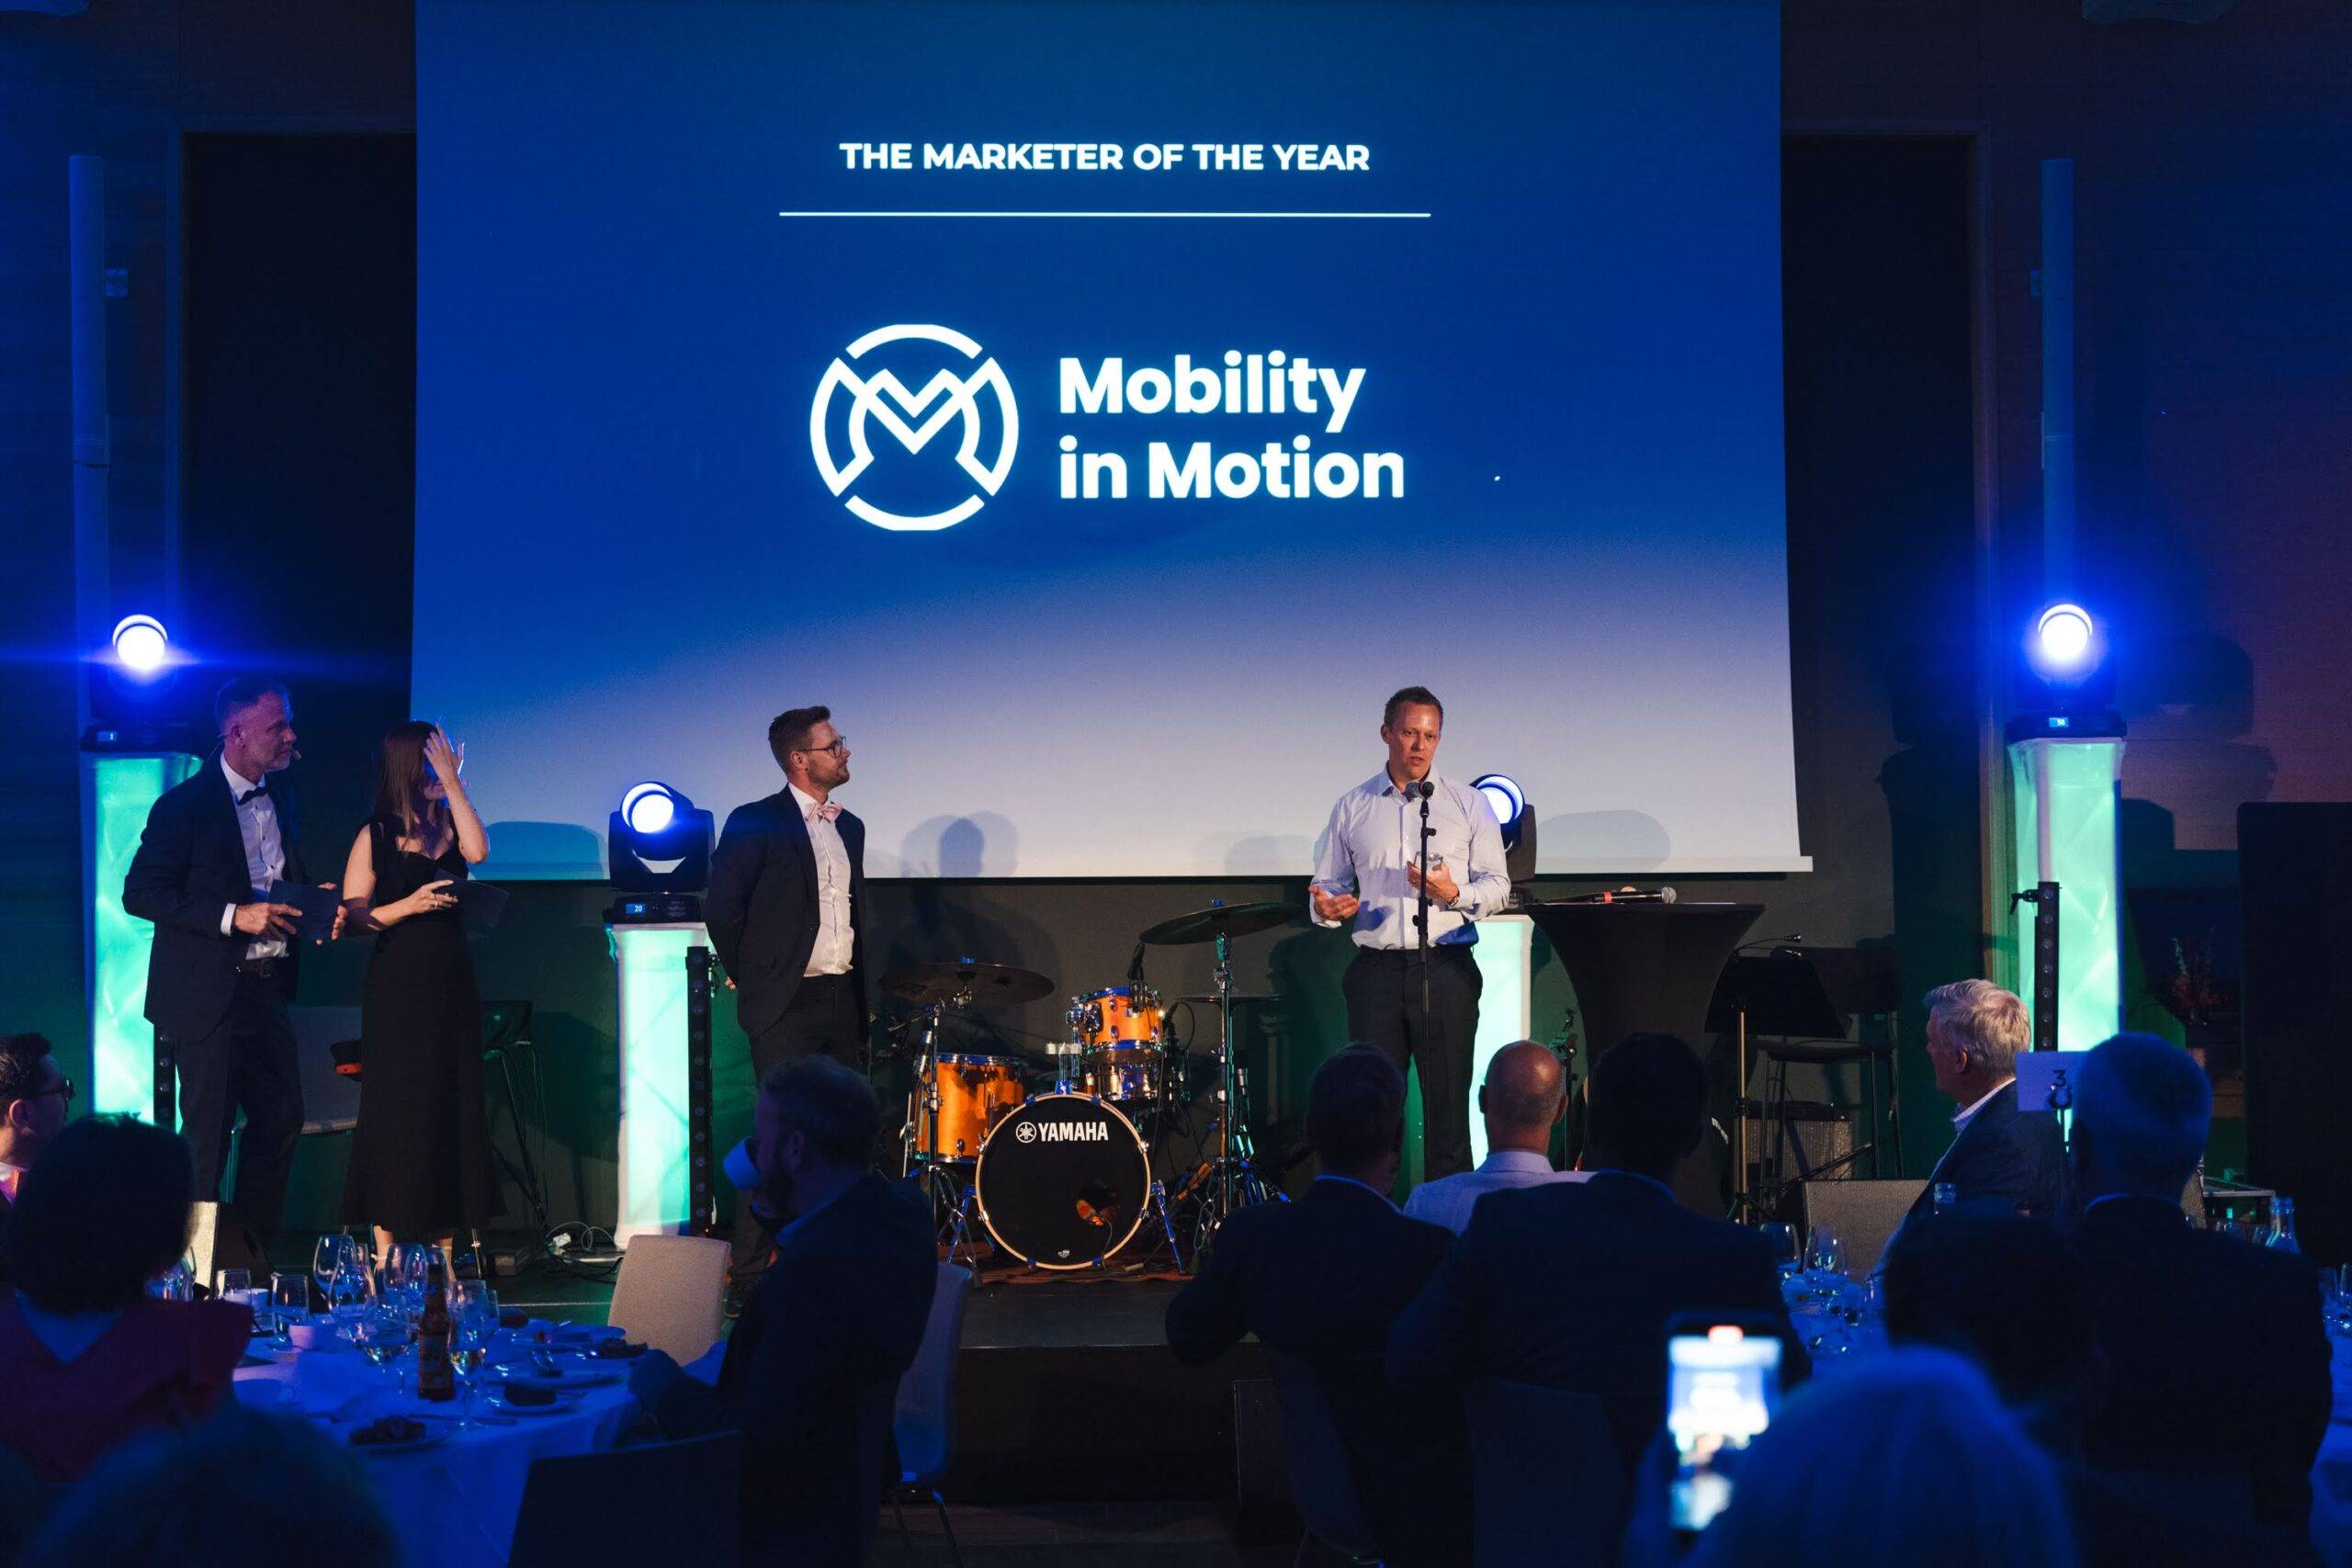 Managing Director of Mobility in Motion, Matt Fieldhouse on stage accepting 'Marketer of the year' award at BraunAbility Partner Conference.